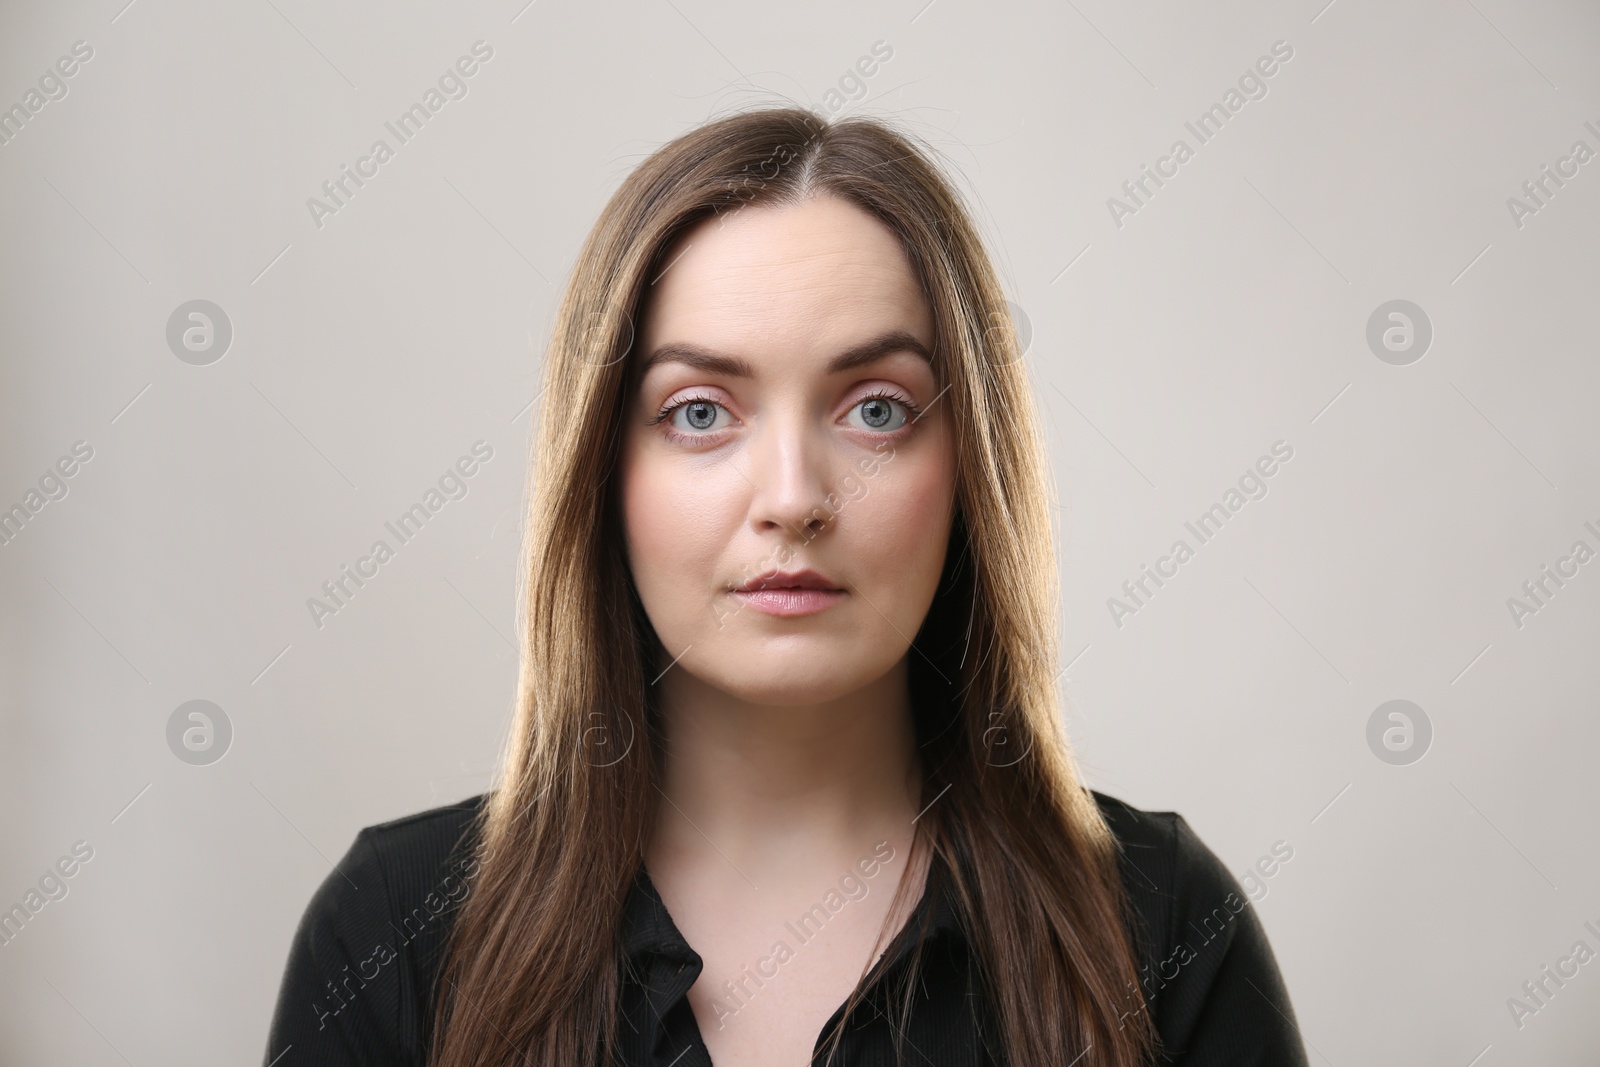 Photo of Portrait of beautiful young woman on beige background